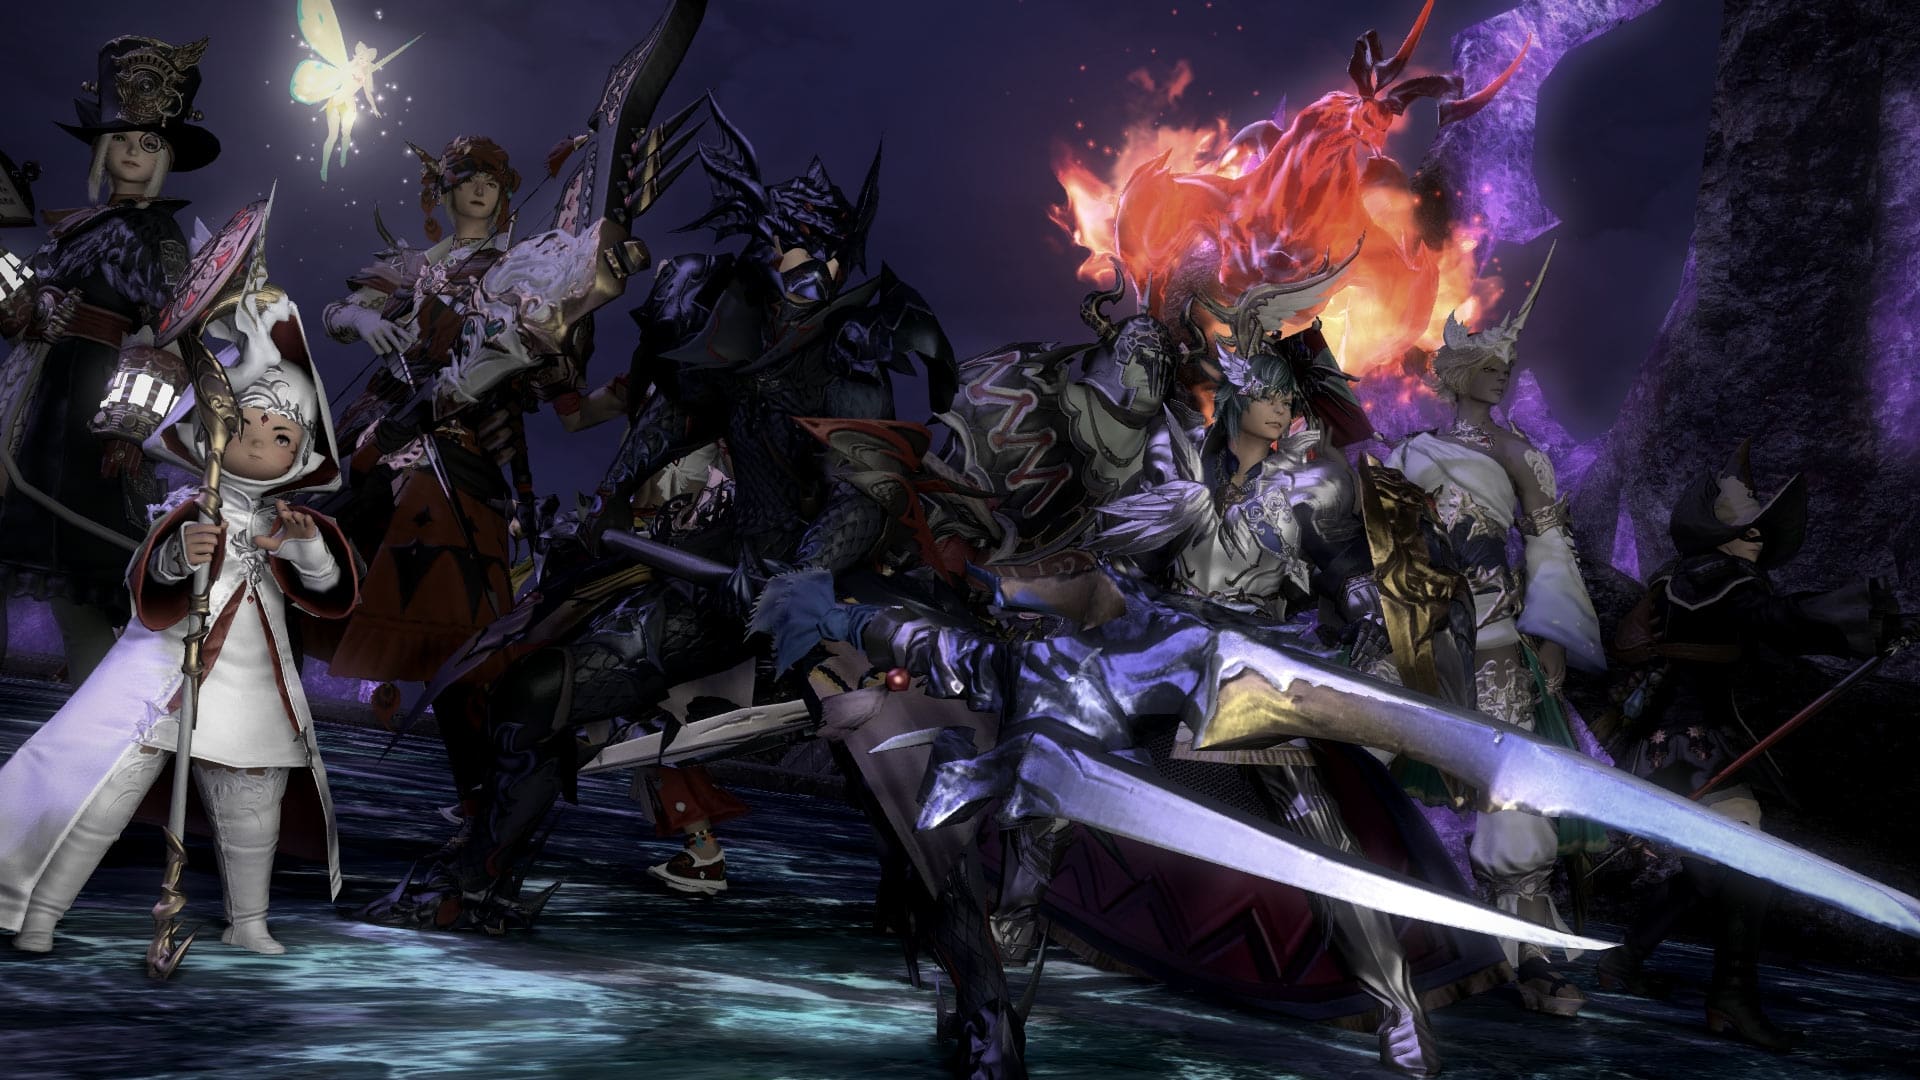 final-fantasy-xiv-free-trial-extended-to-heavensward-more-options-level-cap-increased-to-60